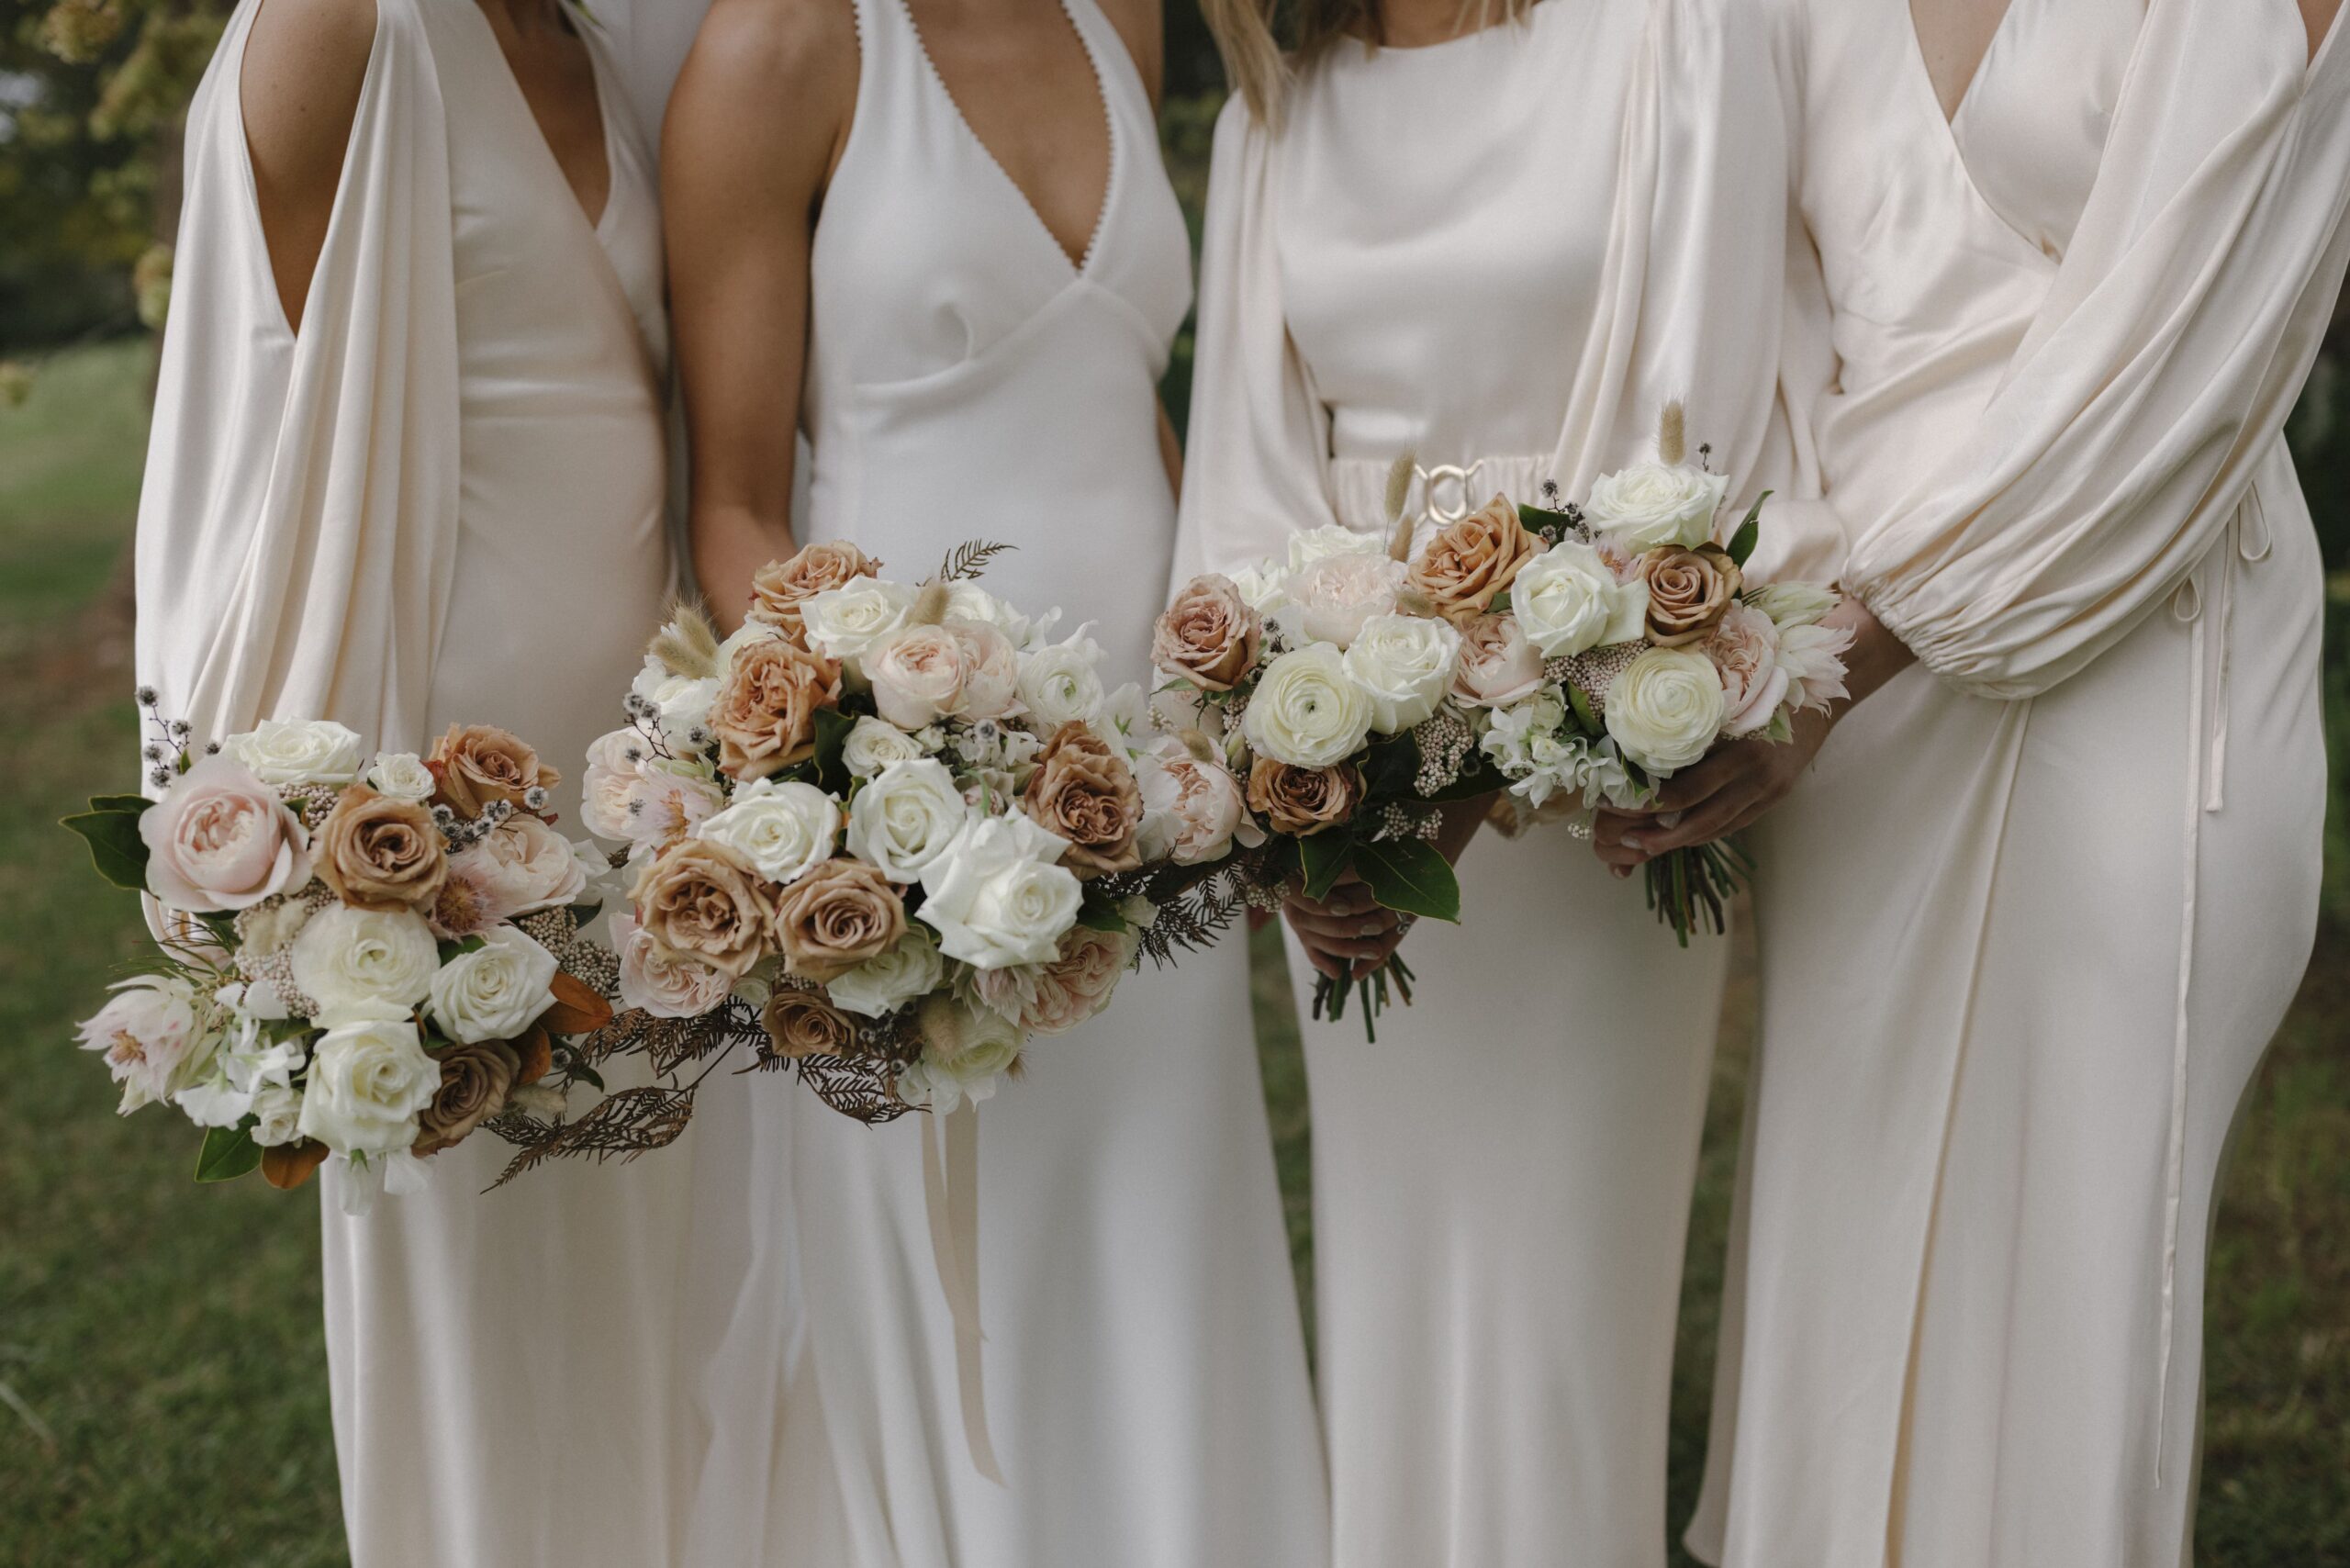 Close up of Olivia and bridesmaids gowns and bouquets - bridesmaids are wearing softly draped light creamy blush gowns with long sleeves. Bouquets are soft pink, cream and an earthy brown